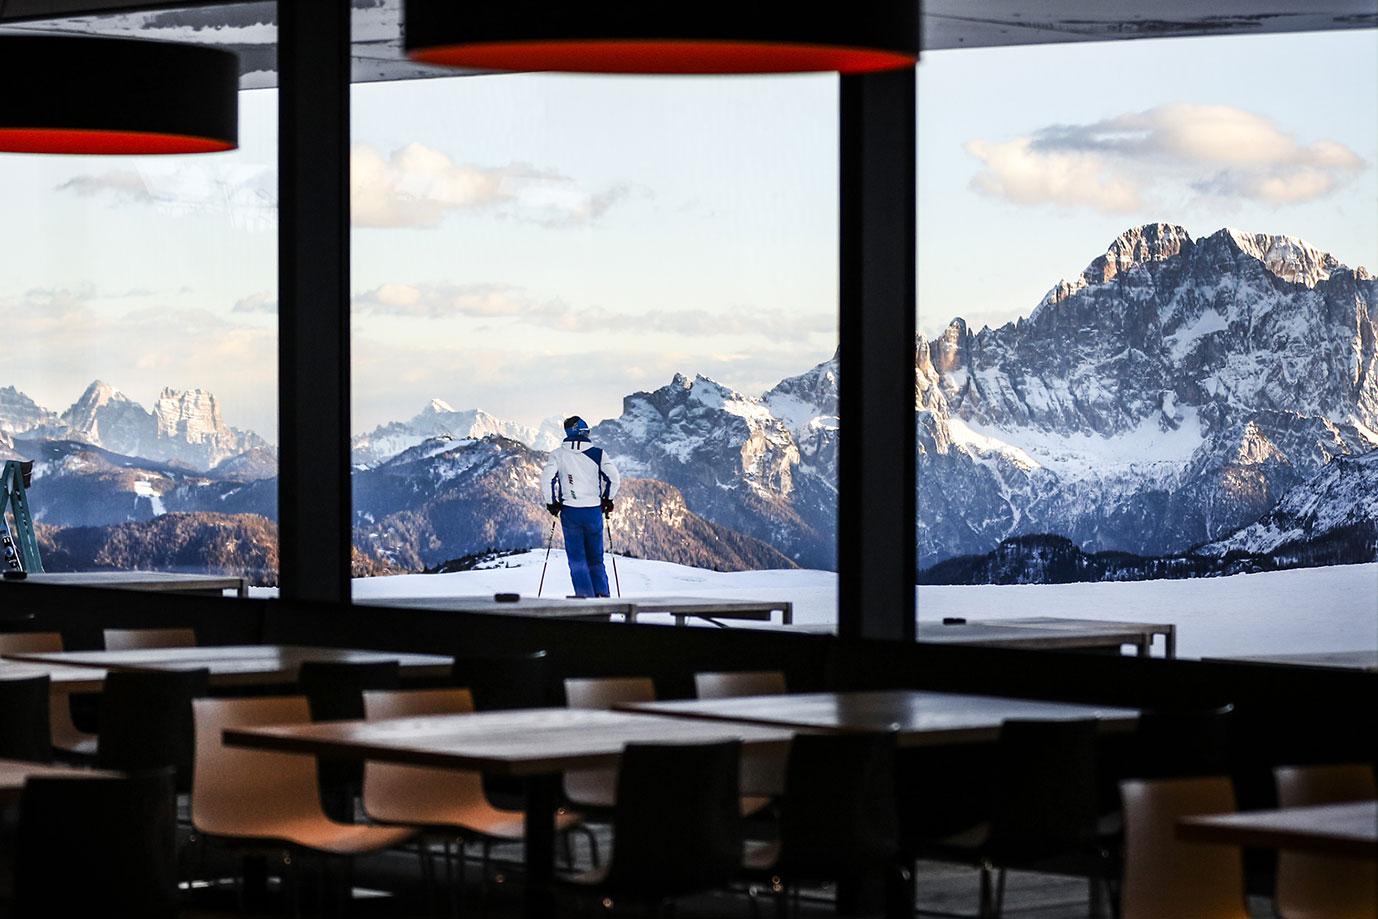 Front view of the Piz Boè kitchen where three chefs are preparing lunch to be provided to customers in the self-service area.